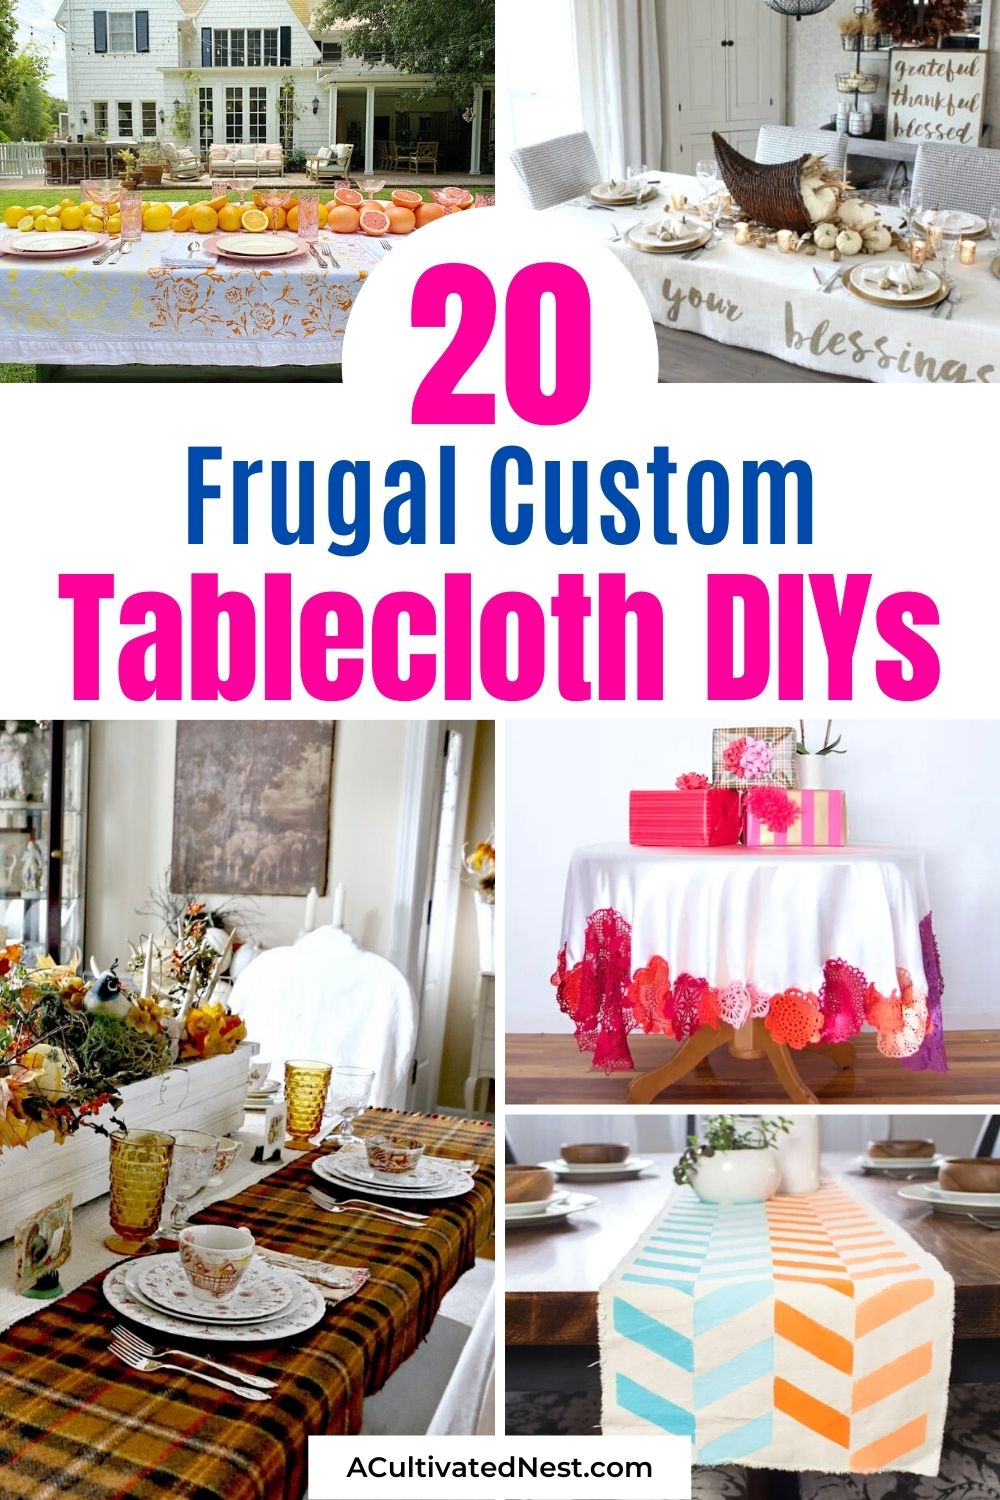 20 Frugal Custom Tablecloth DIYs- You can create the perfect tablescape on a budget with these frugal custom tablecloth DIYs! There are so many great ideas for different holidays and seasons! | #sewingProjects #diyProjects #tablescape #DIYs #ACultivatedNest